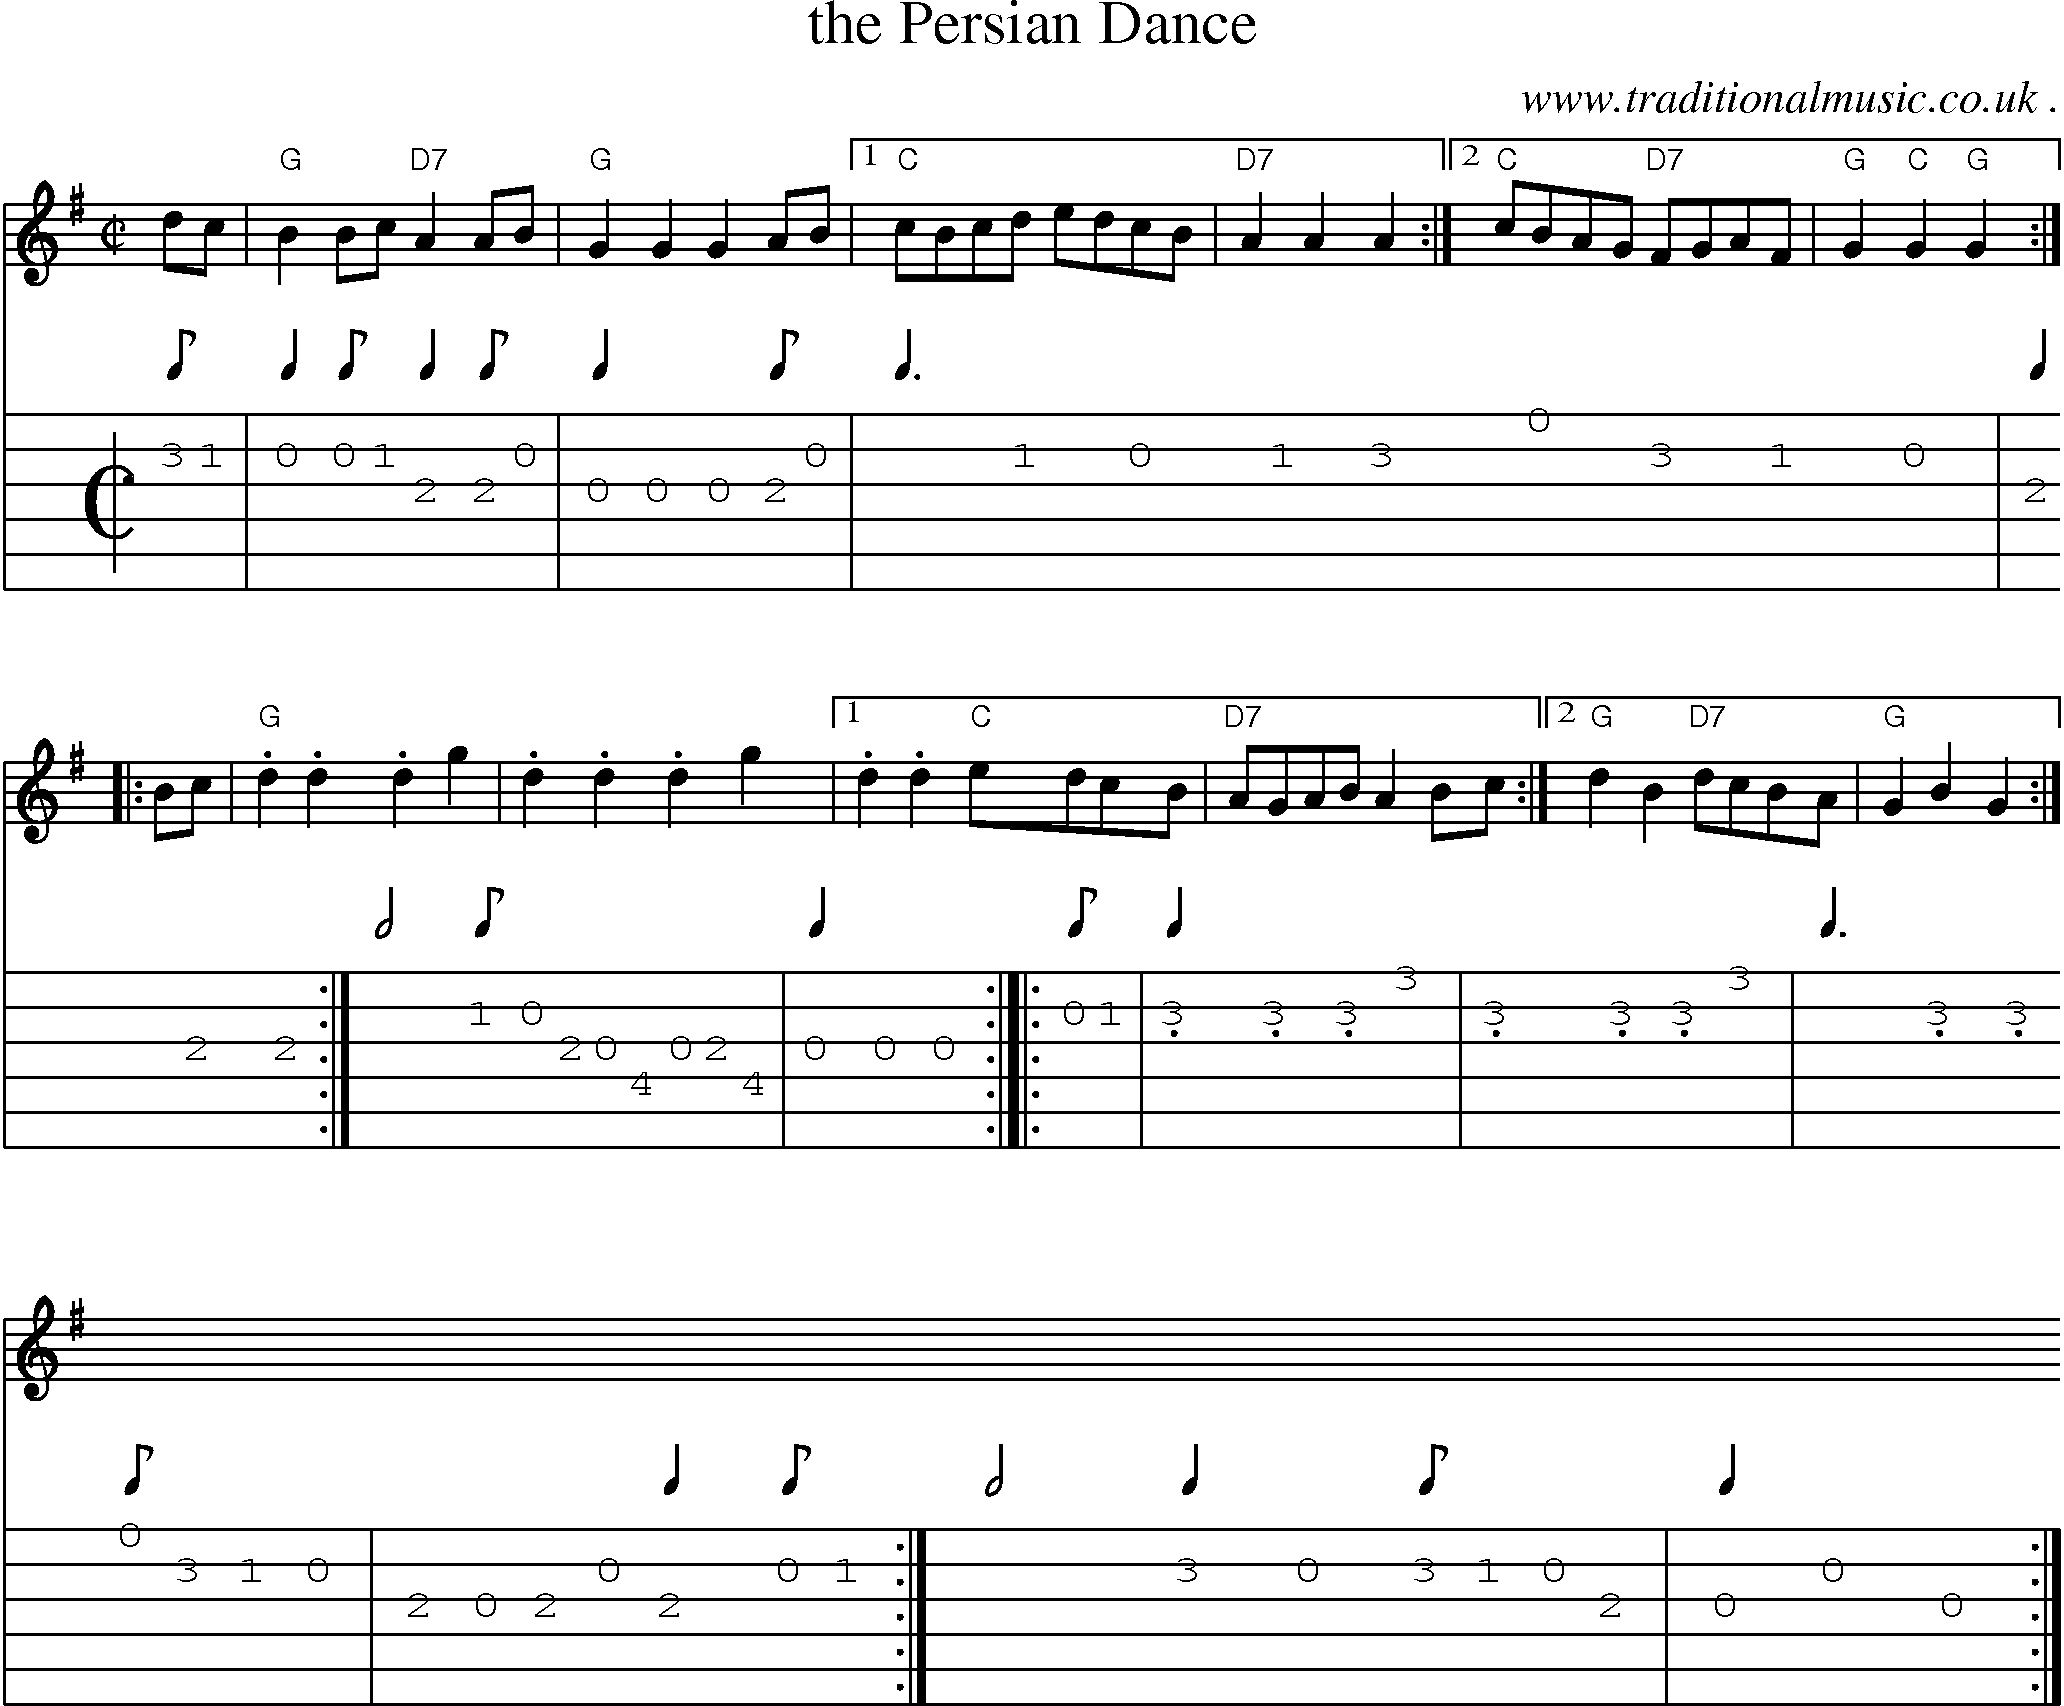 Sheet-music  score, Chords and Guitar Tabs for The Persian Dance